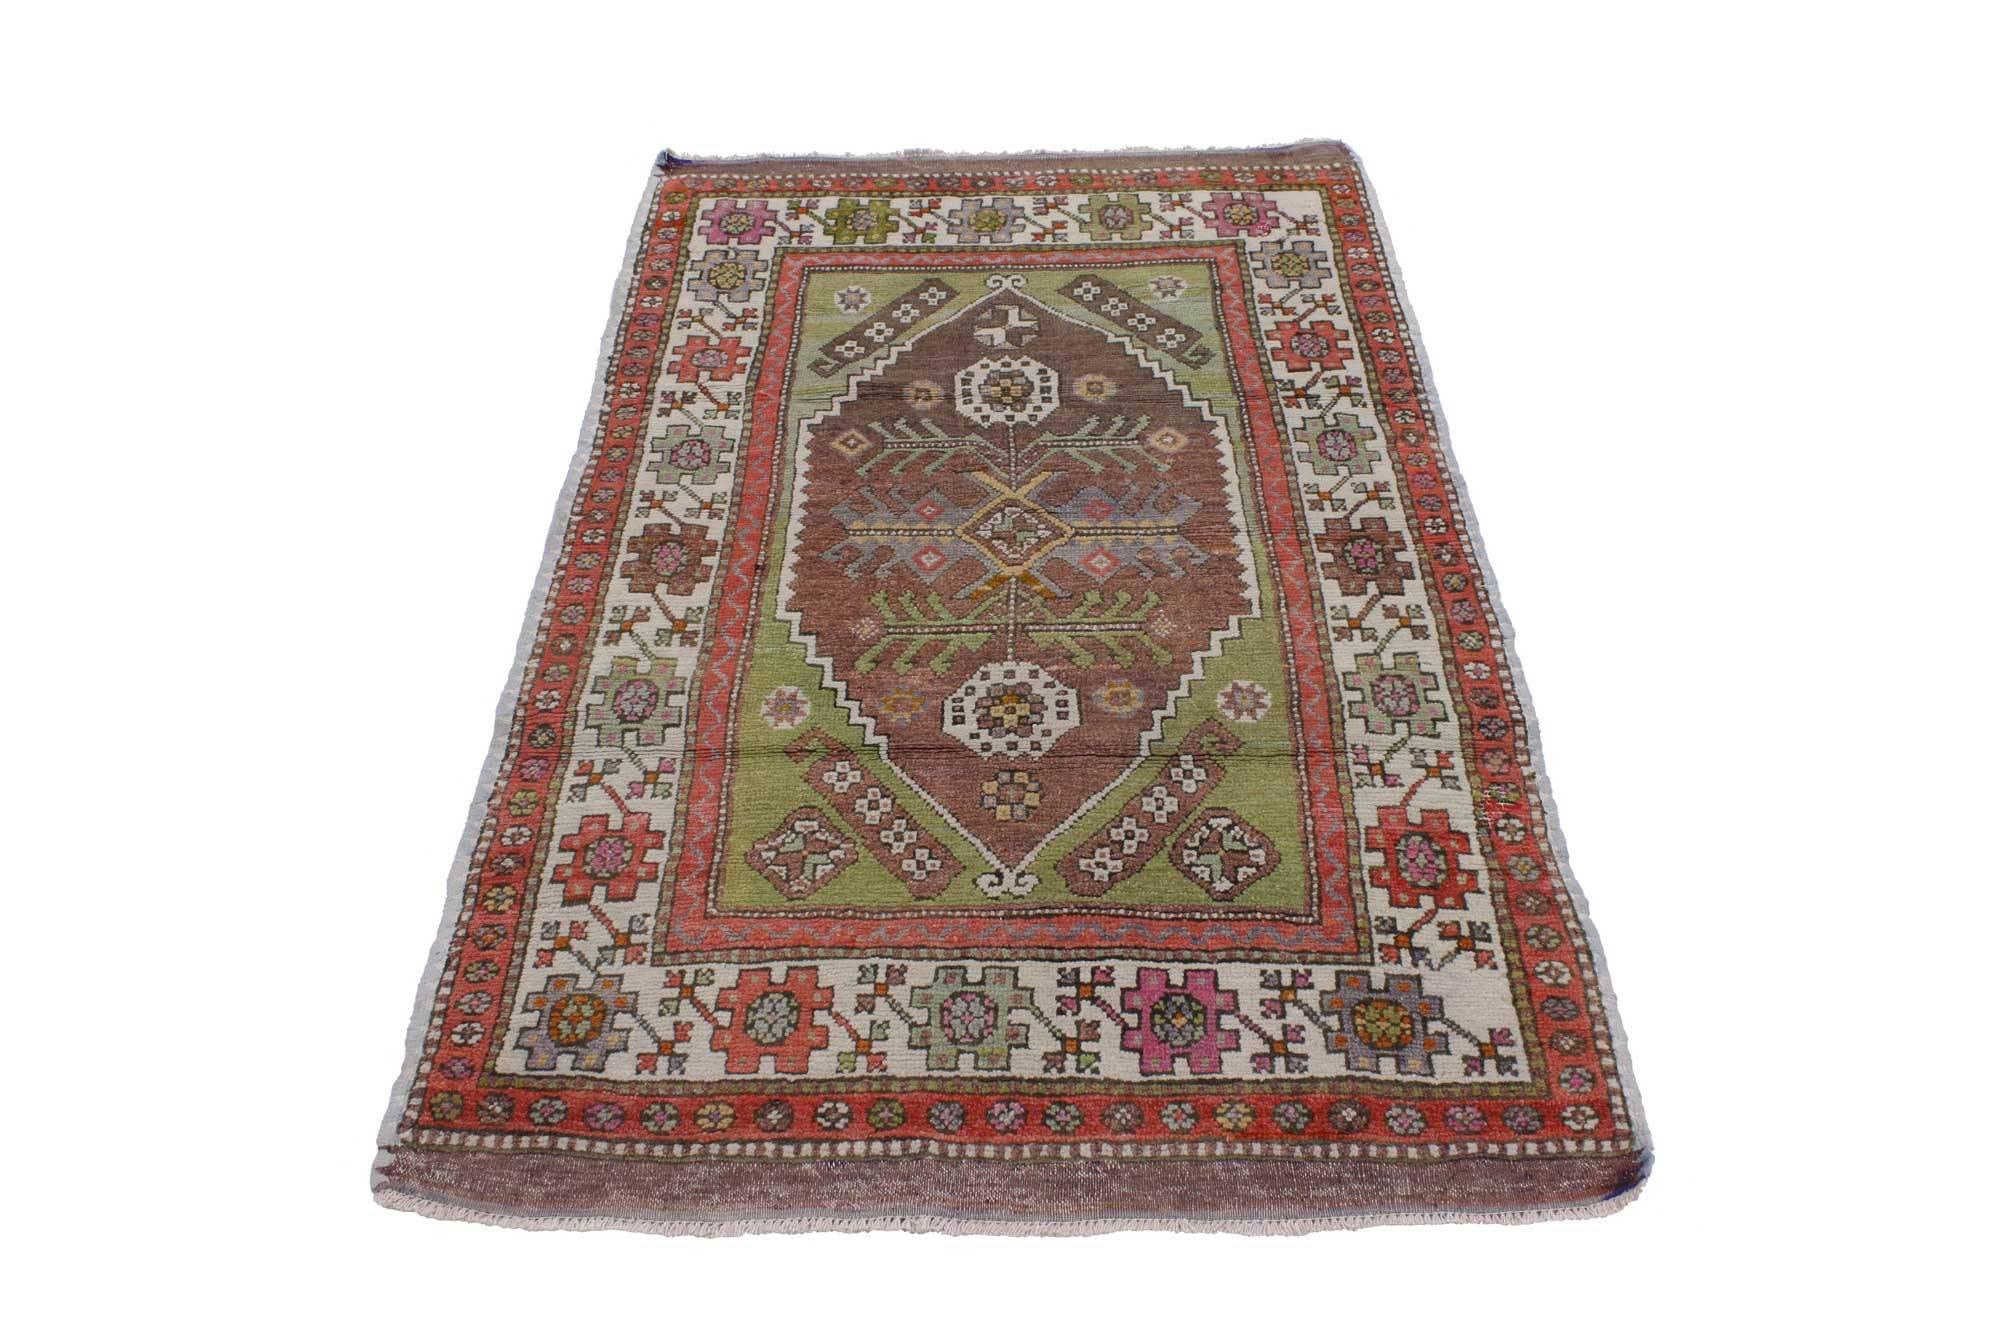 51758, vintage Turkish Oushak rug, colorful rug for kitchen, bath, foyer or entryway. This hand-knotted wool vintage Turkish Oushak rug features a modern traditional style. Immersed in Anatolian history and refined colors, this vintage Oushak rug